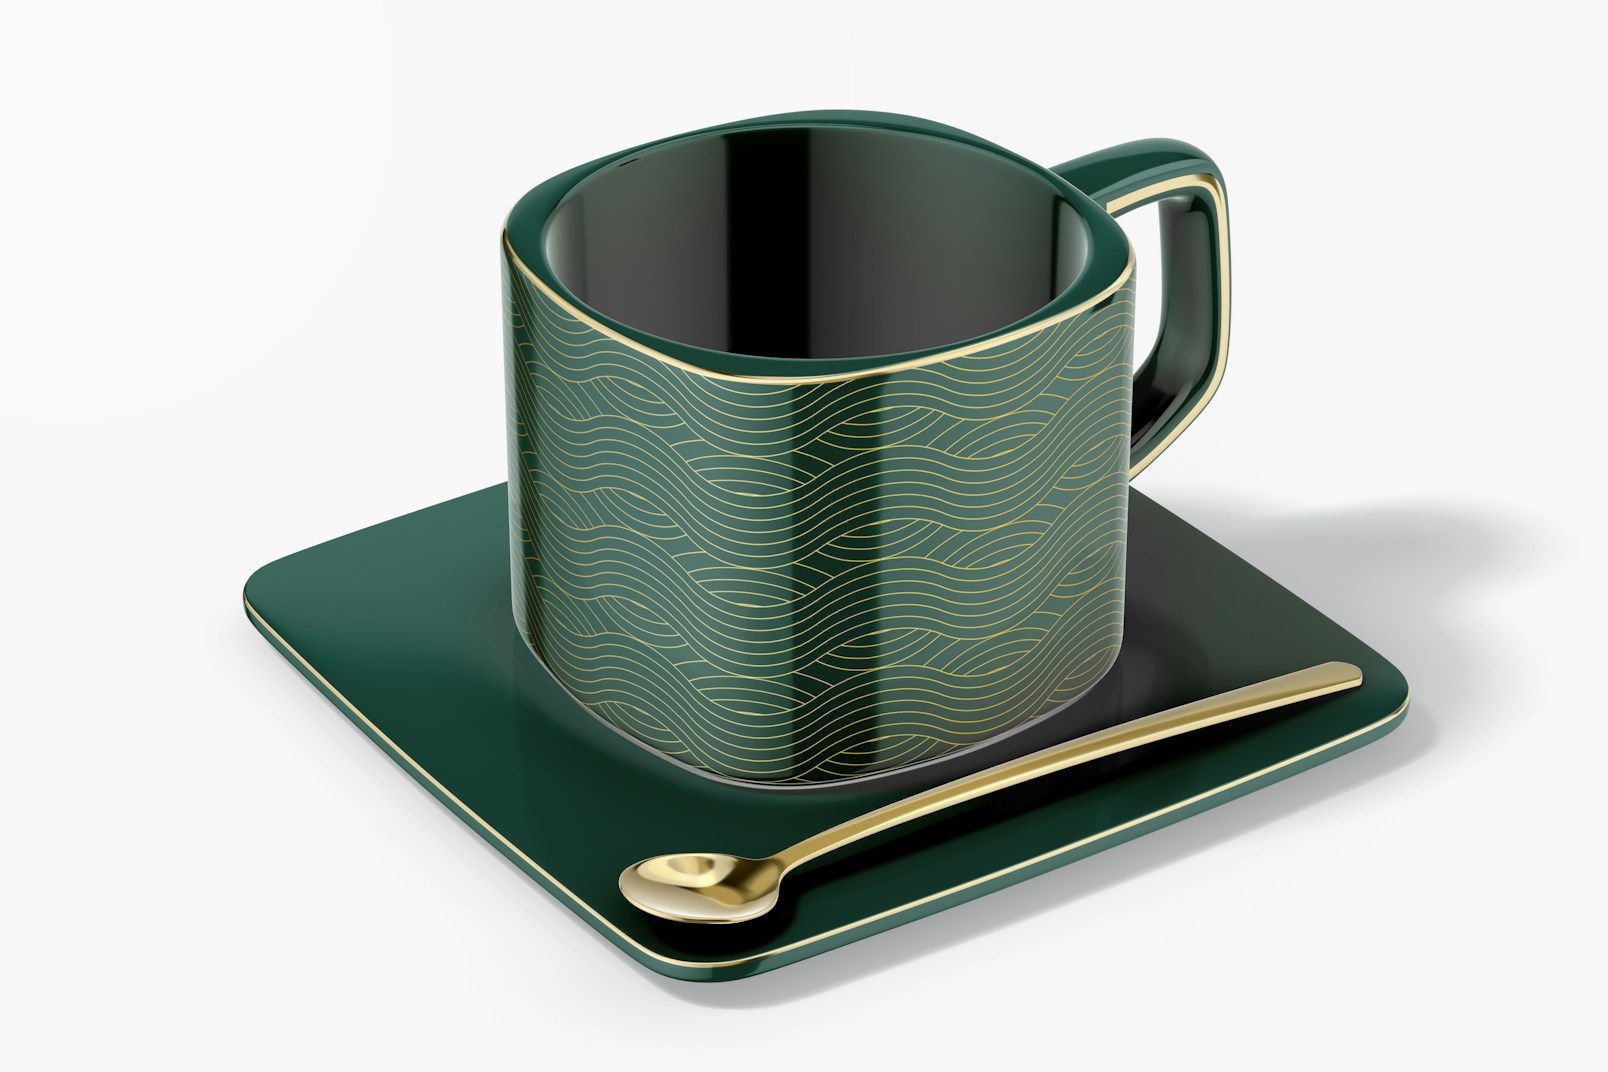 Square Cup Mockup, Perspective